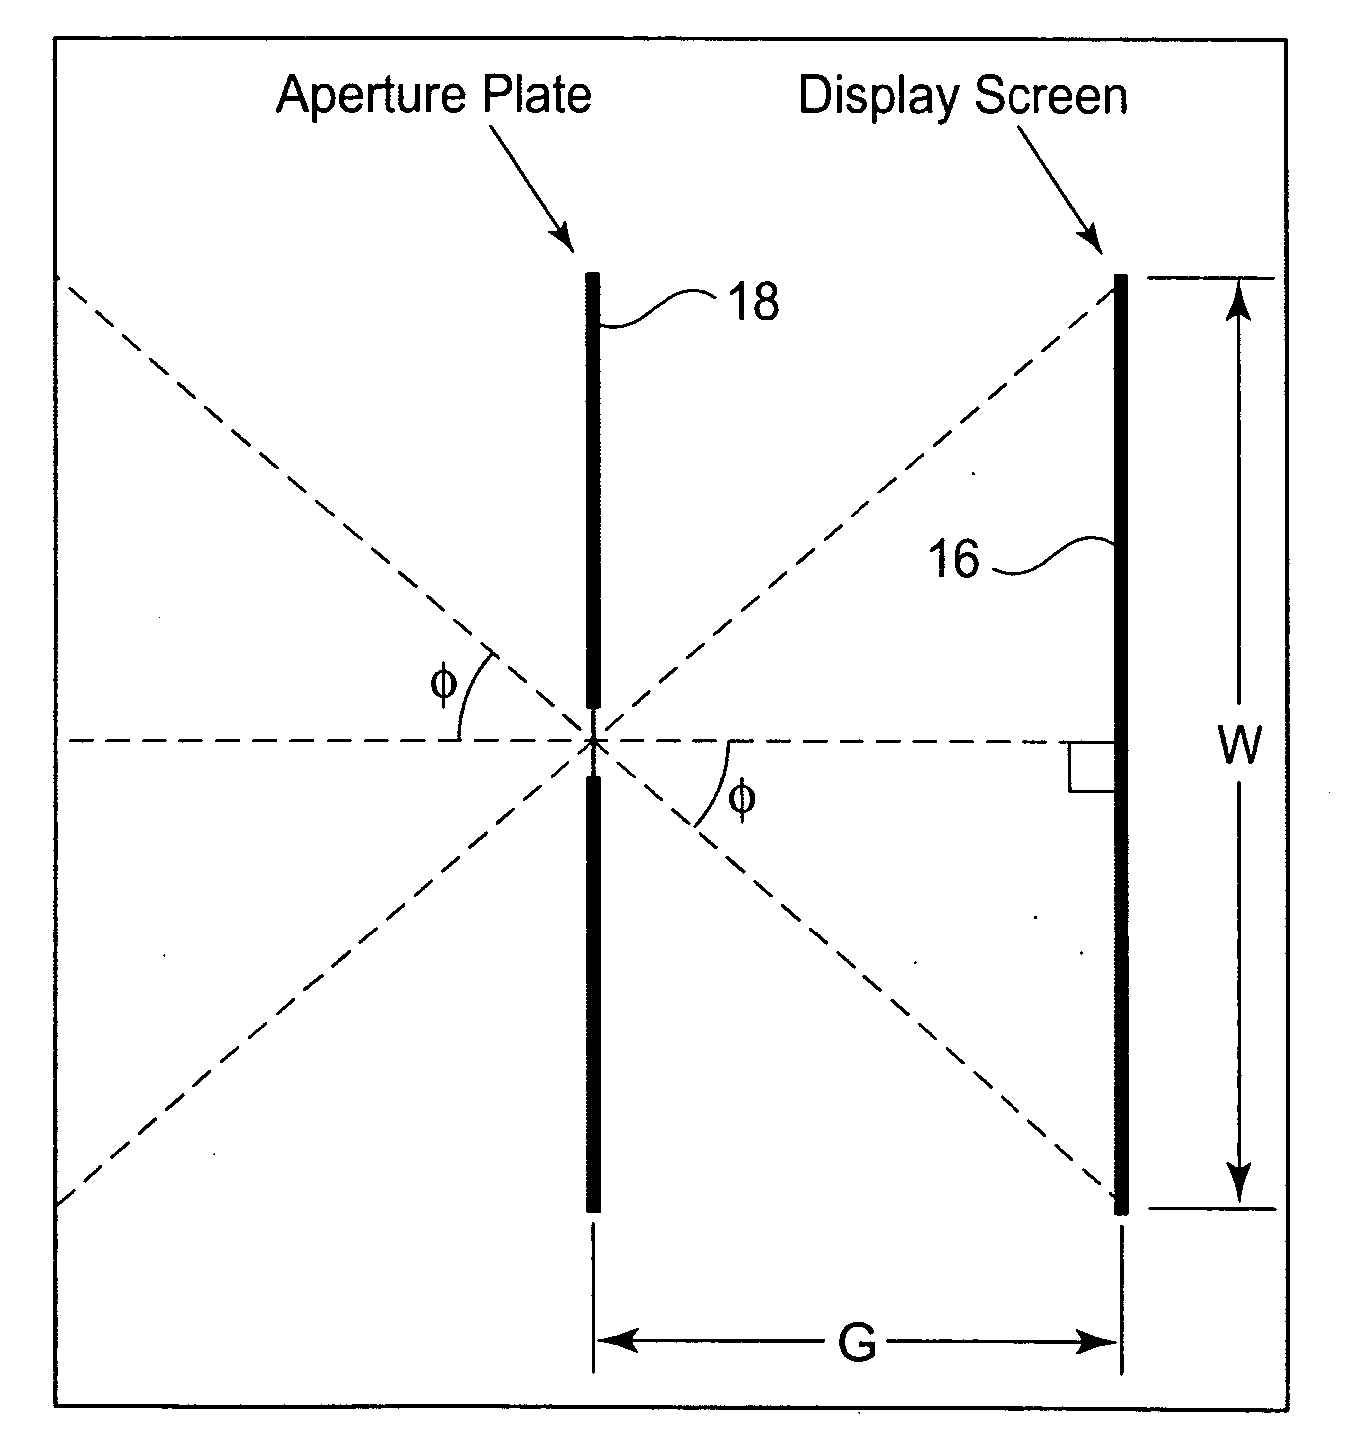 Method and apparatus to retrofit a display device for autostereoscopic display of interactive computer graphics